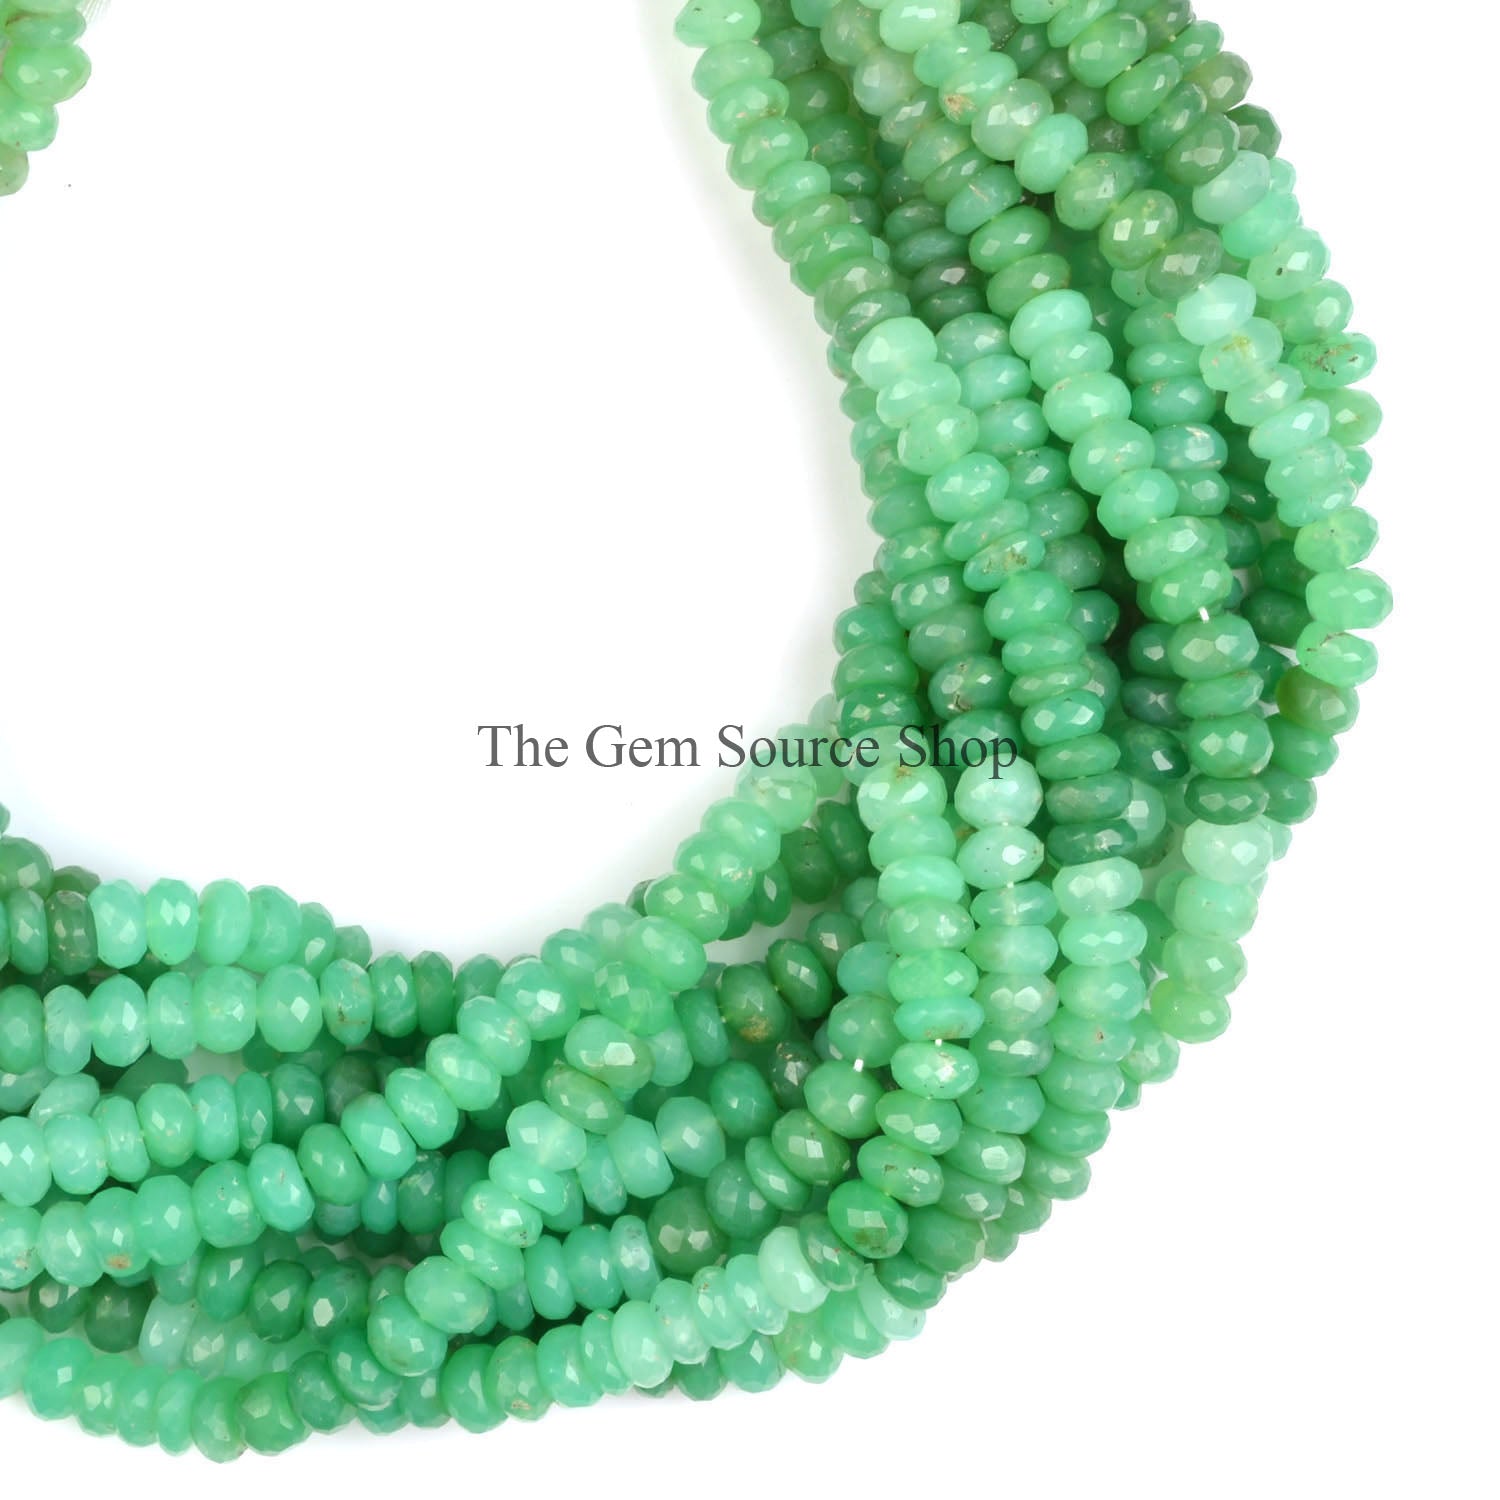 Chrysoprase Beads, Chrysoprase Faceted Beads, Chrysoprase Rondelle Beads, Beads For Jewelry